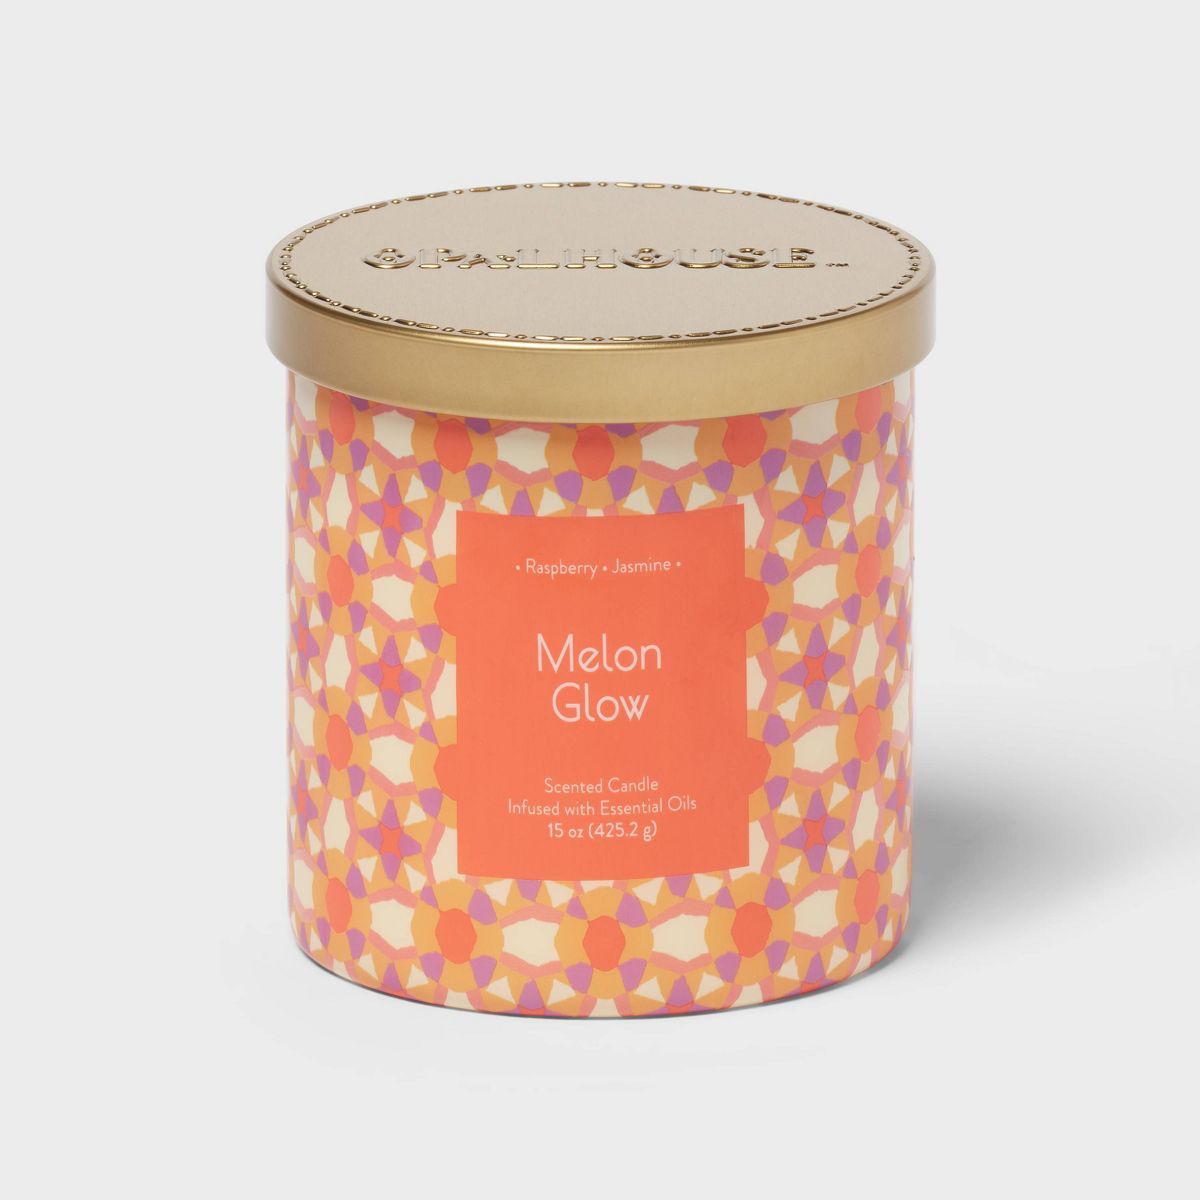 2-Wick Glass Jar 15oz Candle with Patterned Sleeve Melon Glow - Opalhouse™ | Target